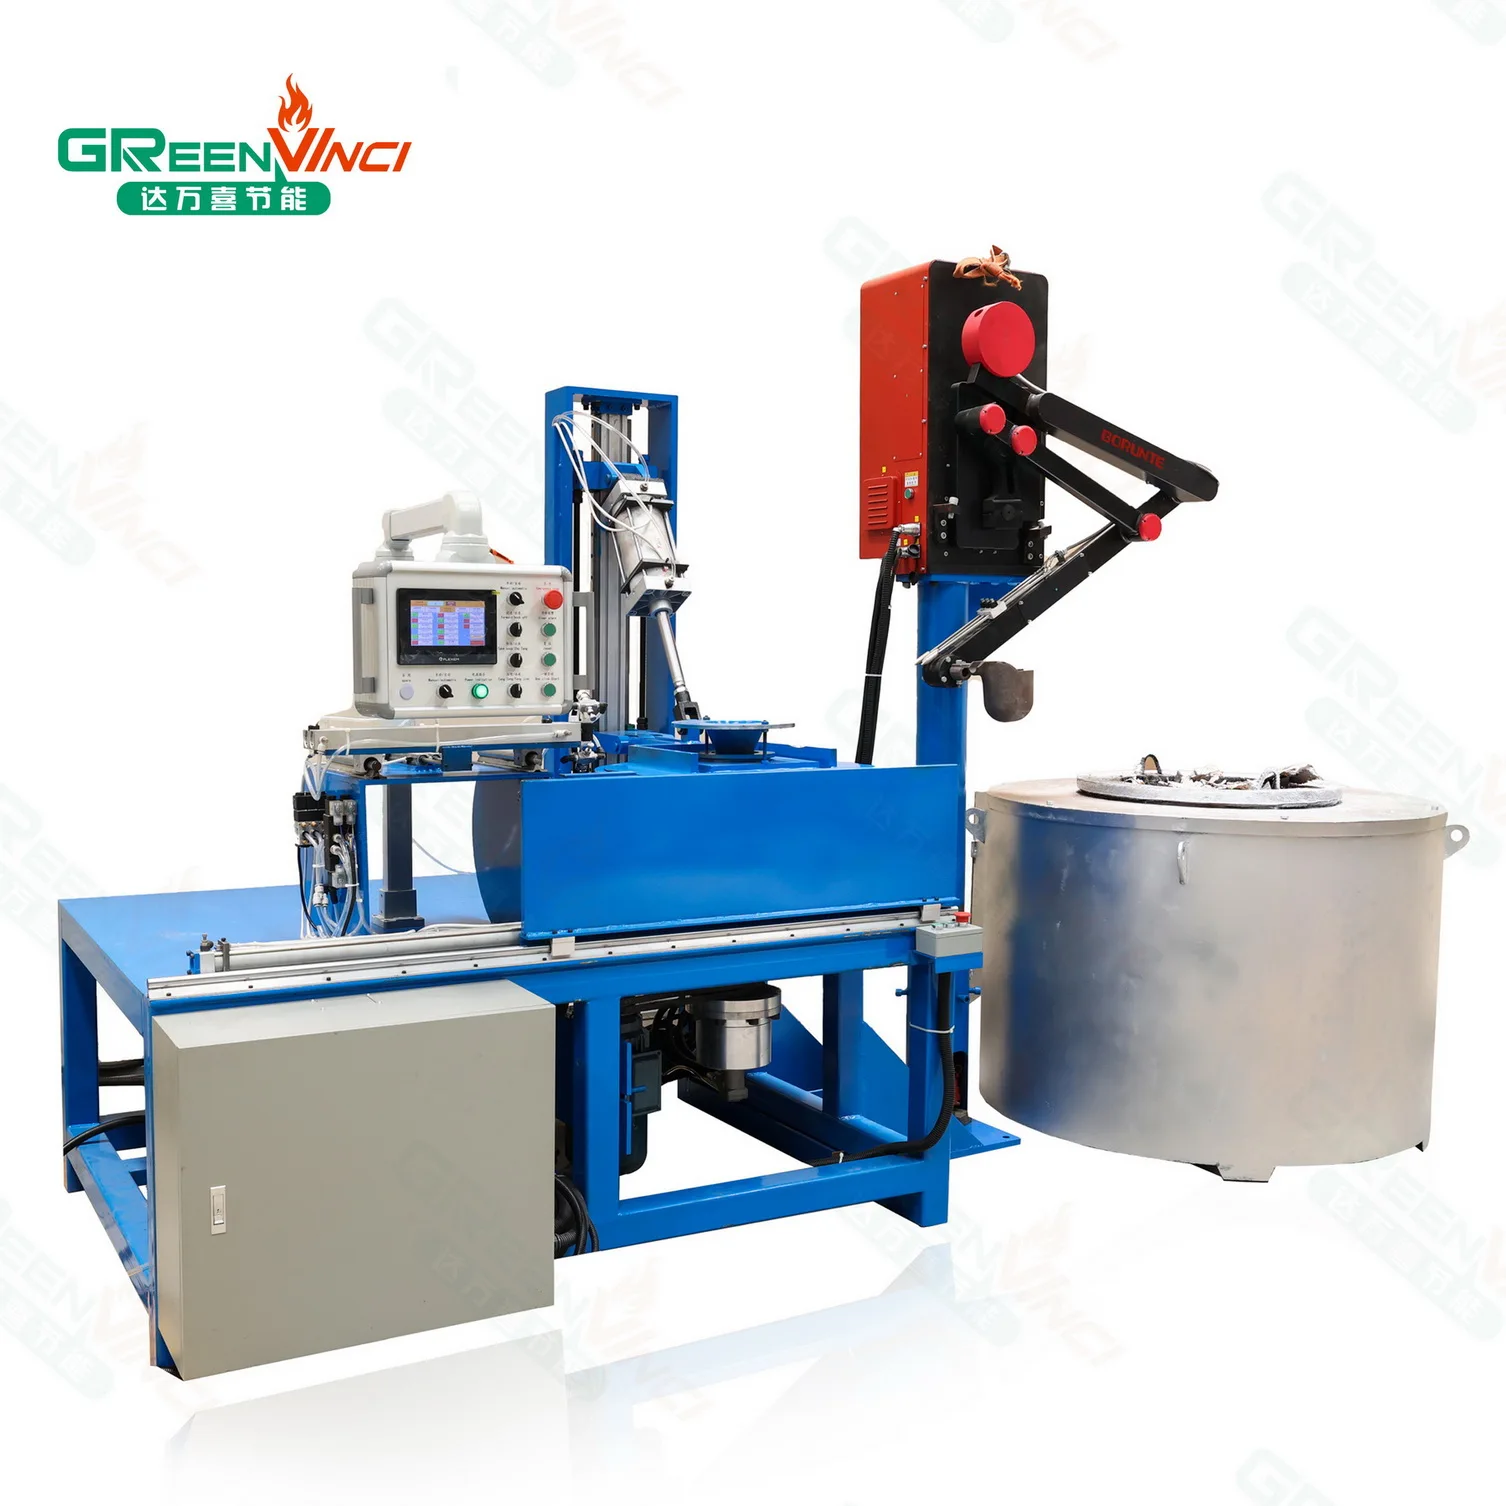 Customized Gas Fired Aluminum Melting Furnace Manufacturers and Suppliers -  Automatic, Environmental, High Efficiency - GreenVinci